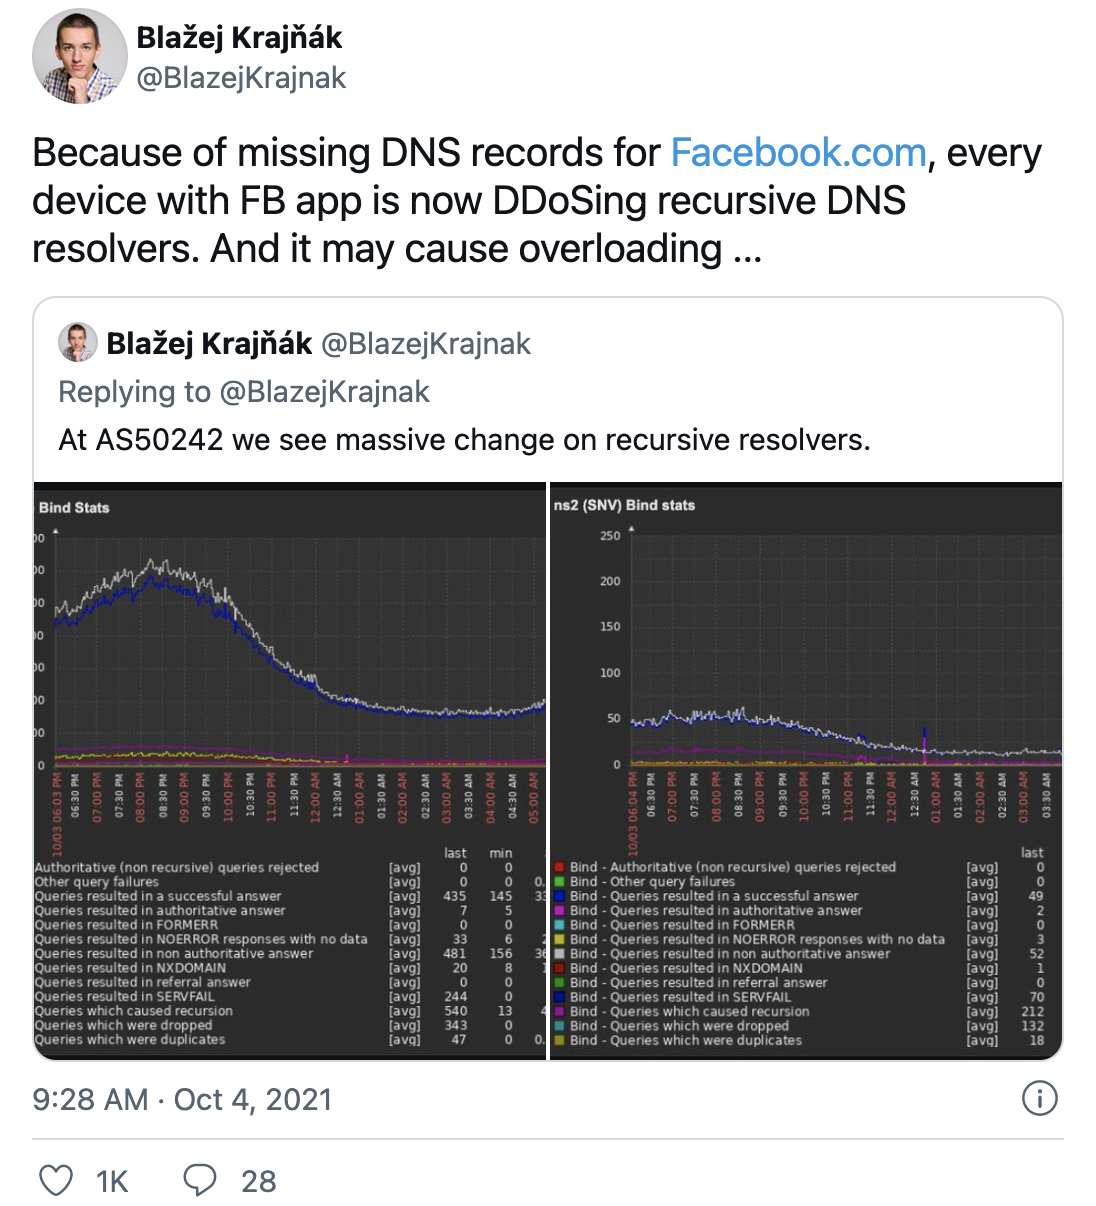 Blažej Krajňák (@BlazejKrajnak) on Twitter: &ldquo;Because of missing DNS records for Facebook.com, every device with FB app is now DDoSing recursive DNS resolvers. And it may cause overloading&hellip;&rdquo;